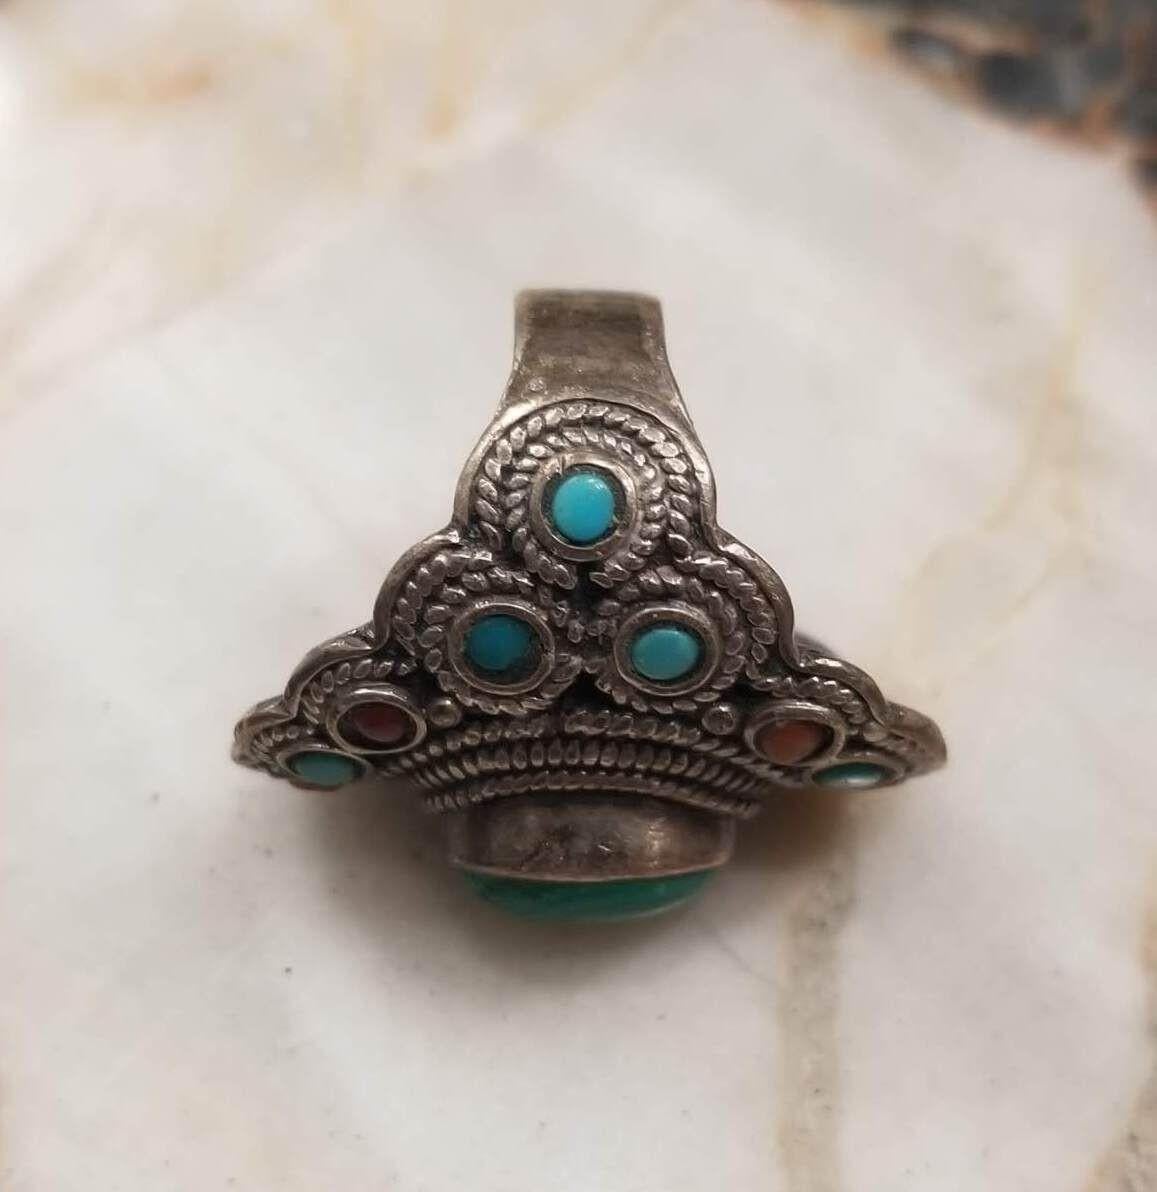 This silver gem pendant ring is adorned with a mesmerizing Malachite gem at its heart. Surrounding the central beauty are smaller Turquoise and Jasper gems, creating an intricate, nature-inspired design. This exquisite piece seamlessly blends